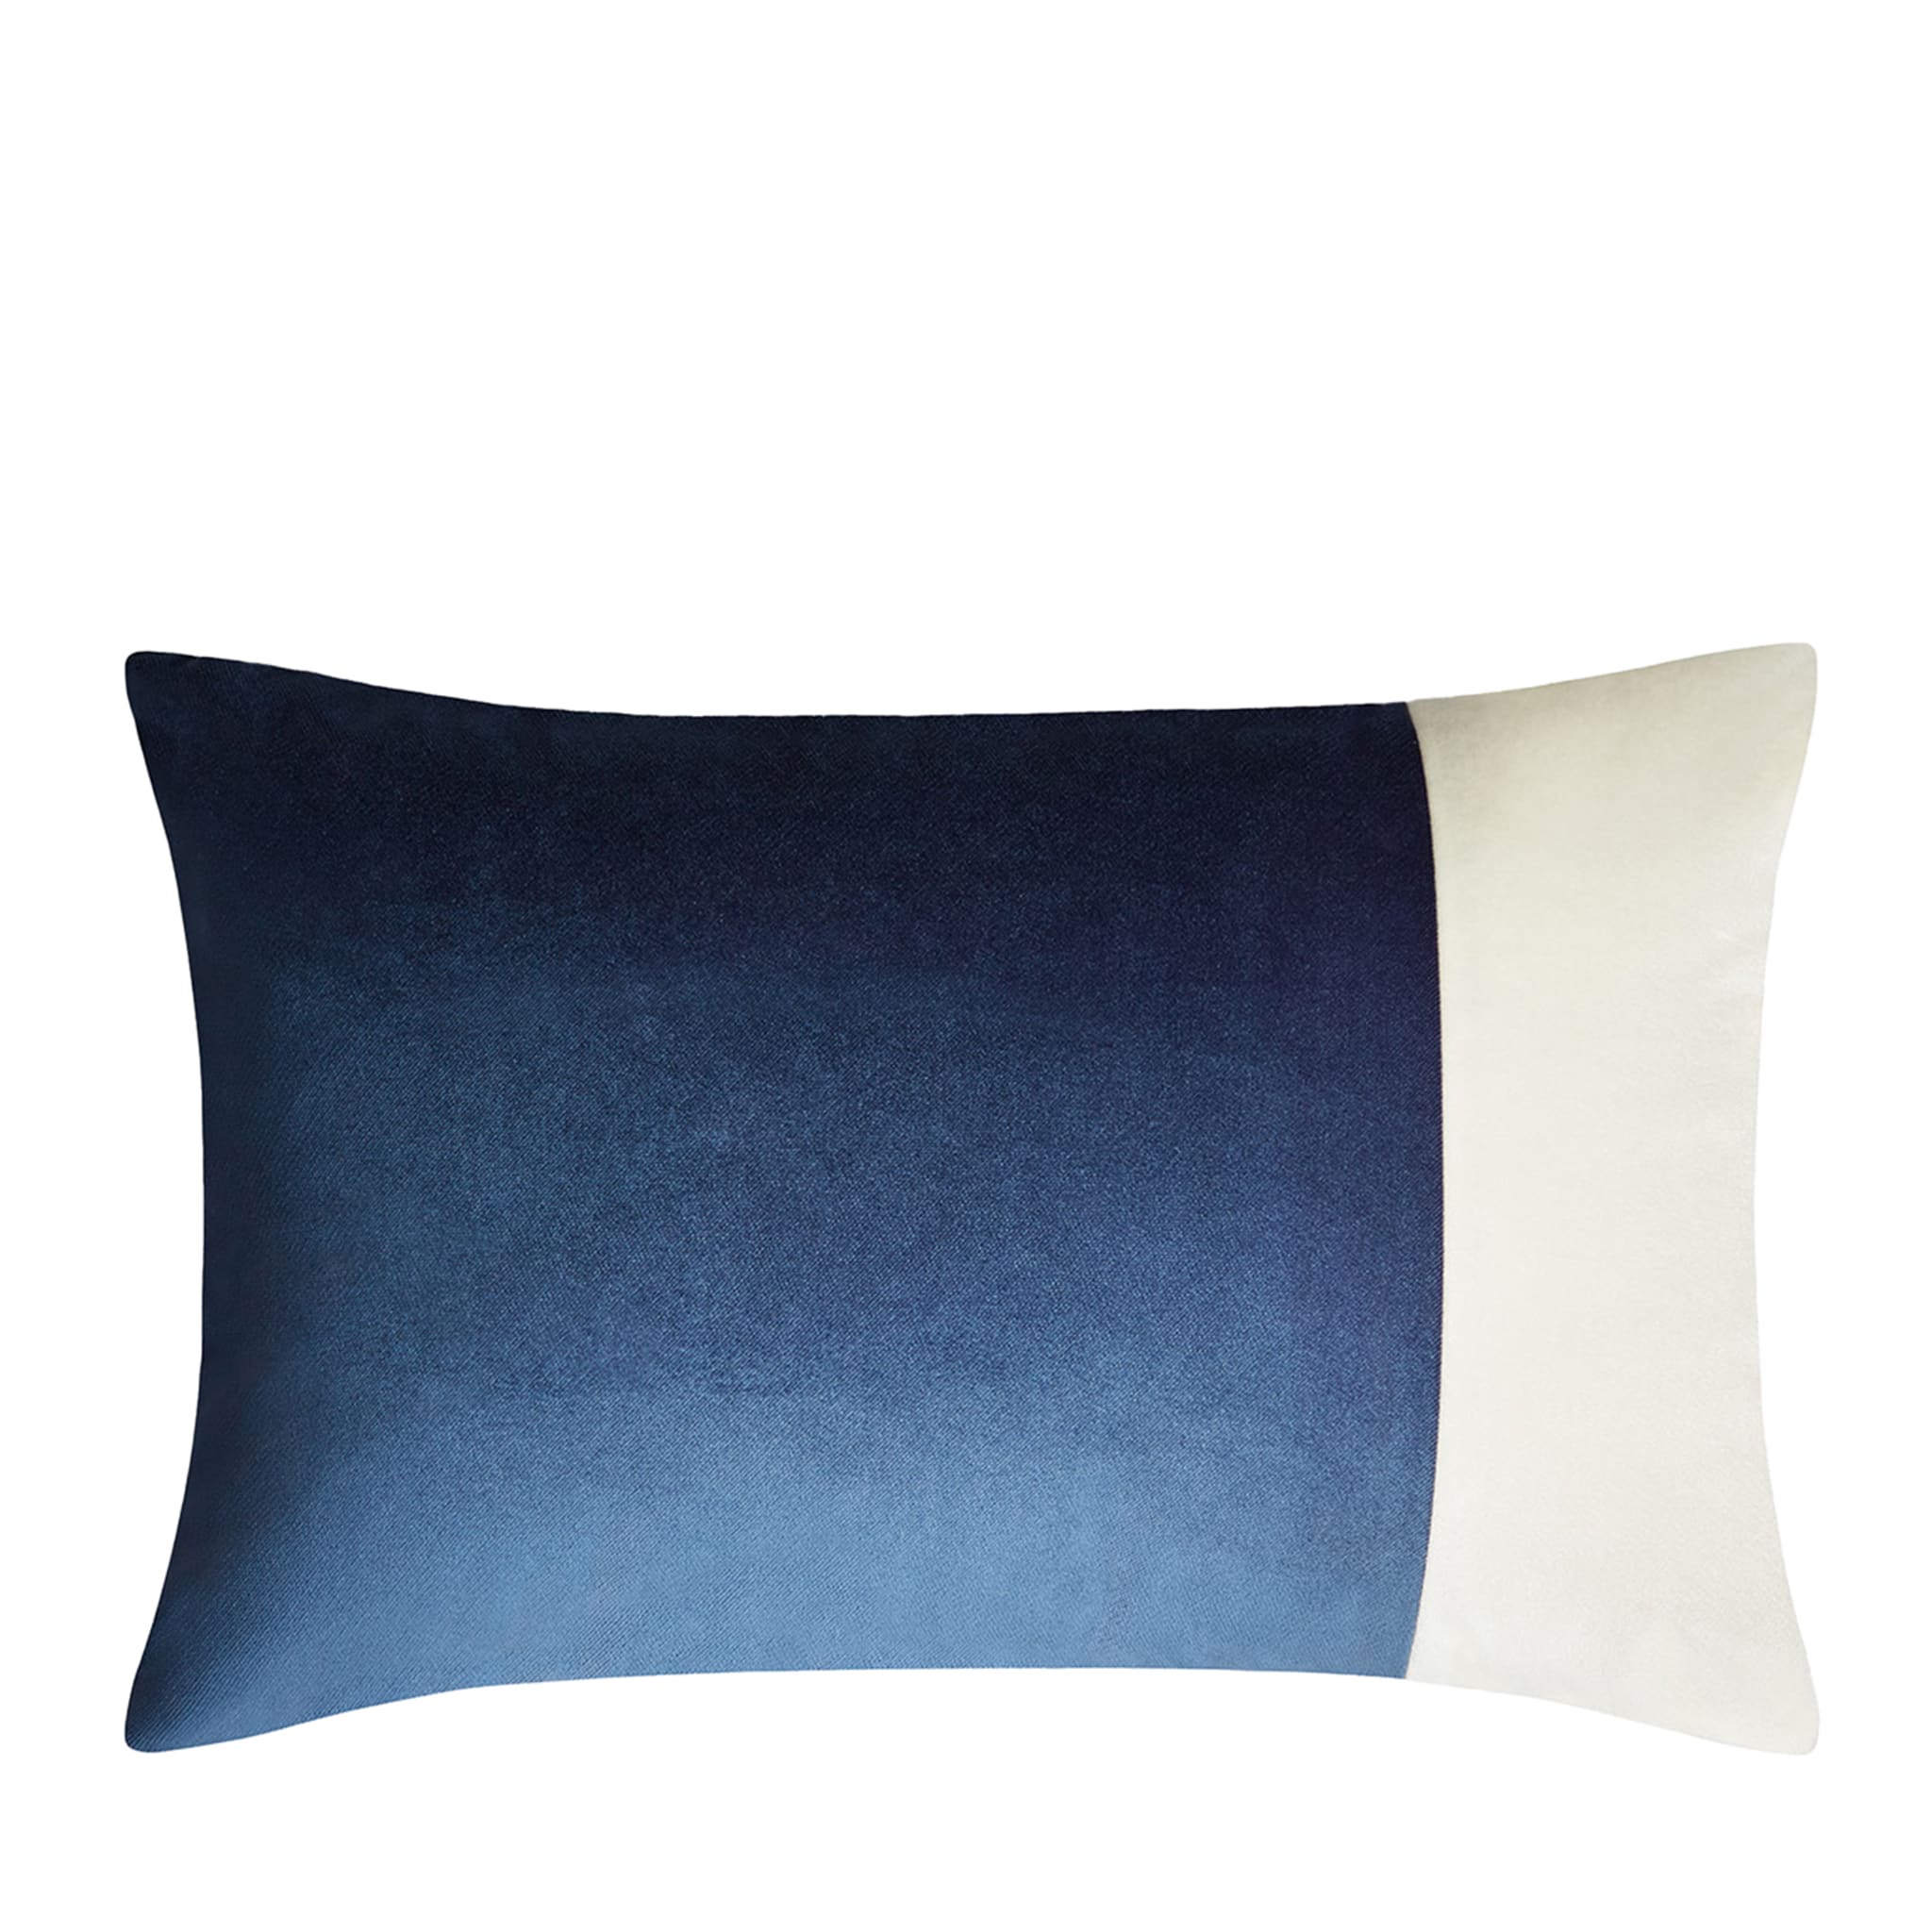 Double Blue and White Rectangular Cushion - Main view